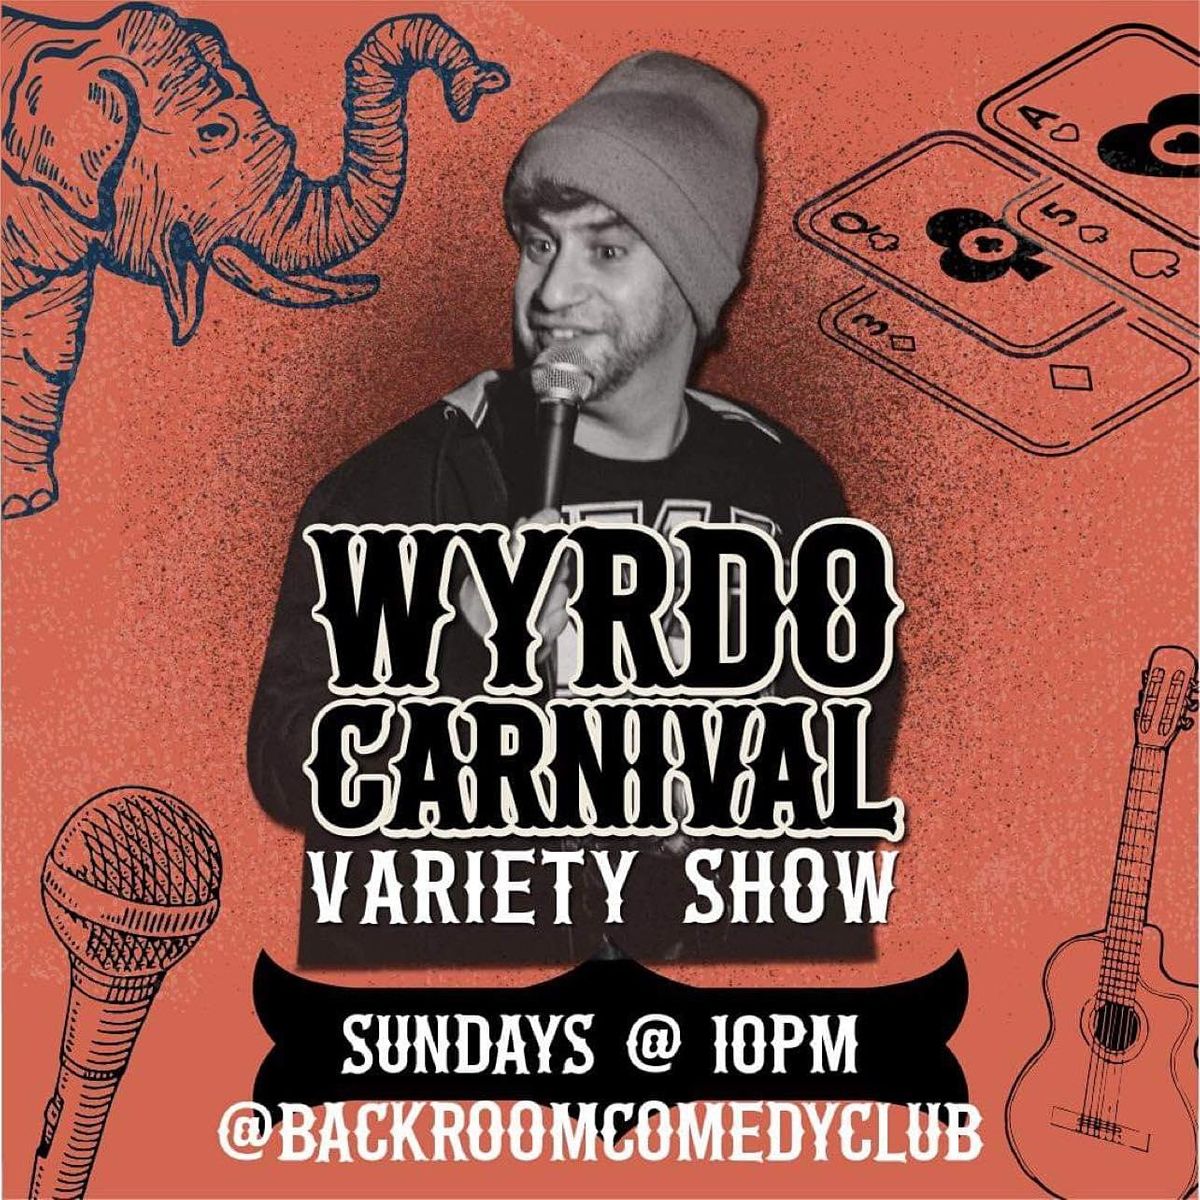 "Wyrdo Carnival" - Variety Show (stand-up comedy is banned) EVERY SUN @10PM